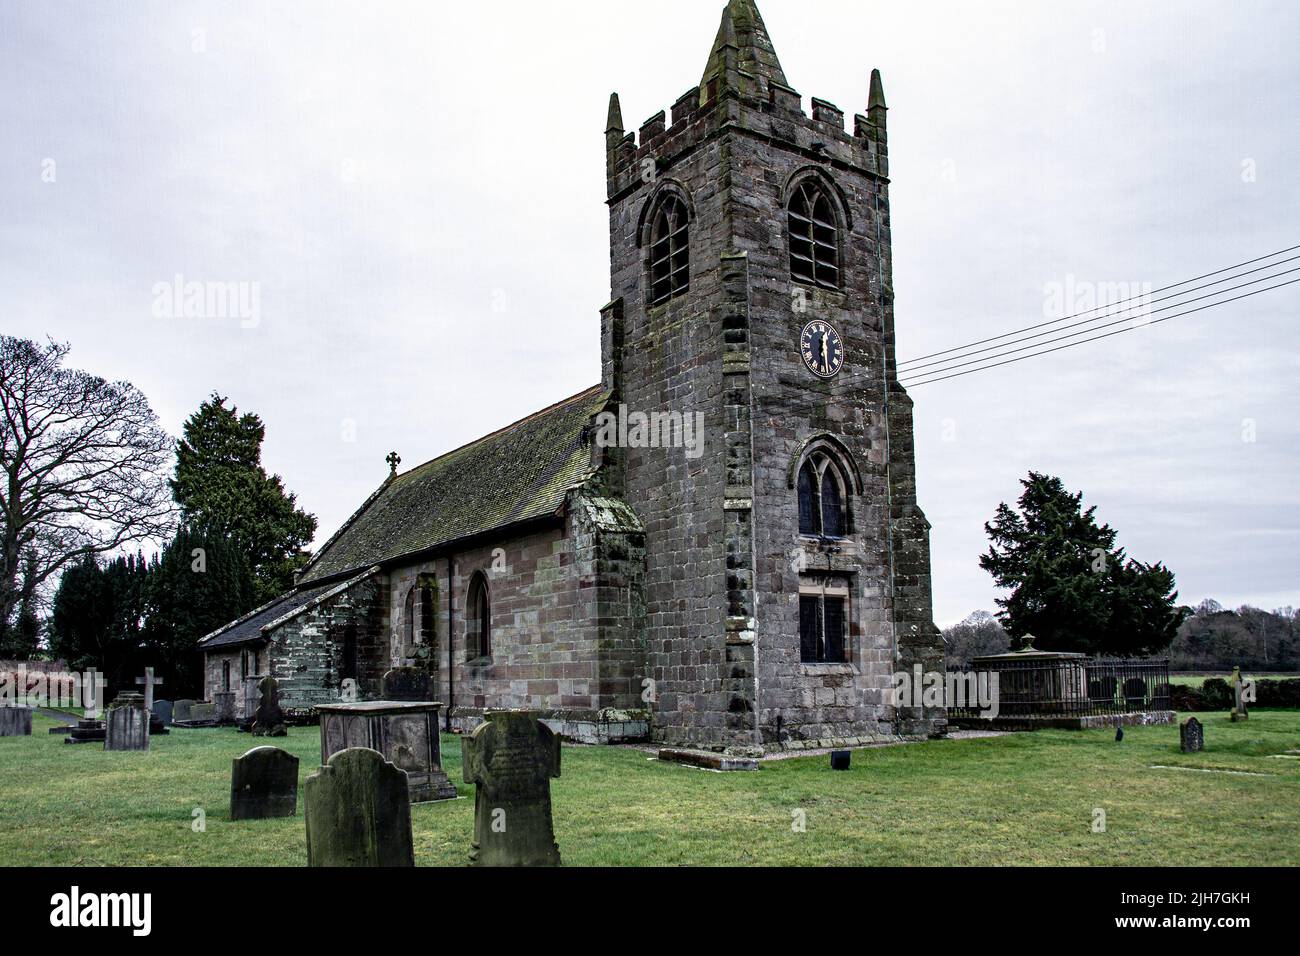 St James church Acton Trussell Staffordshire Stock Photo